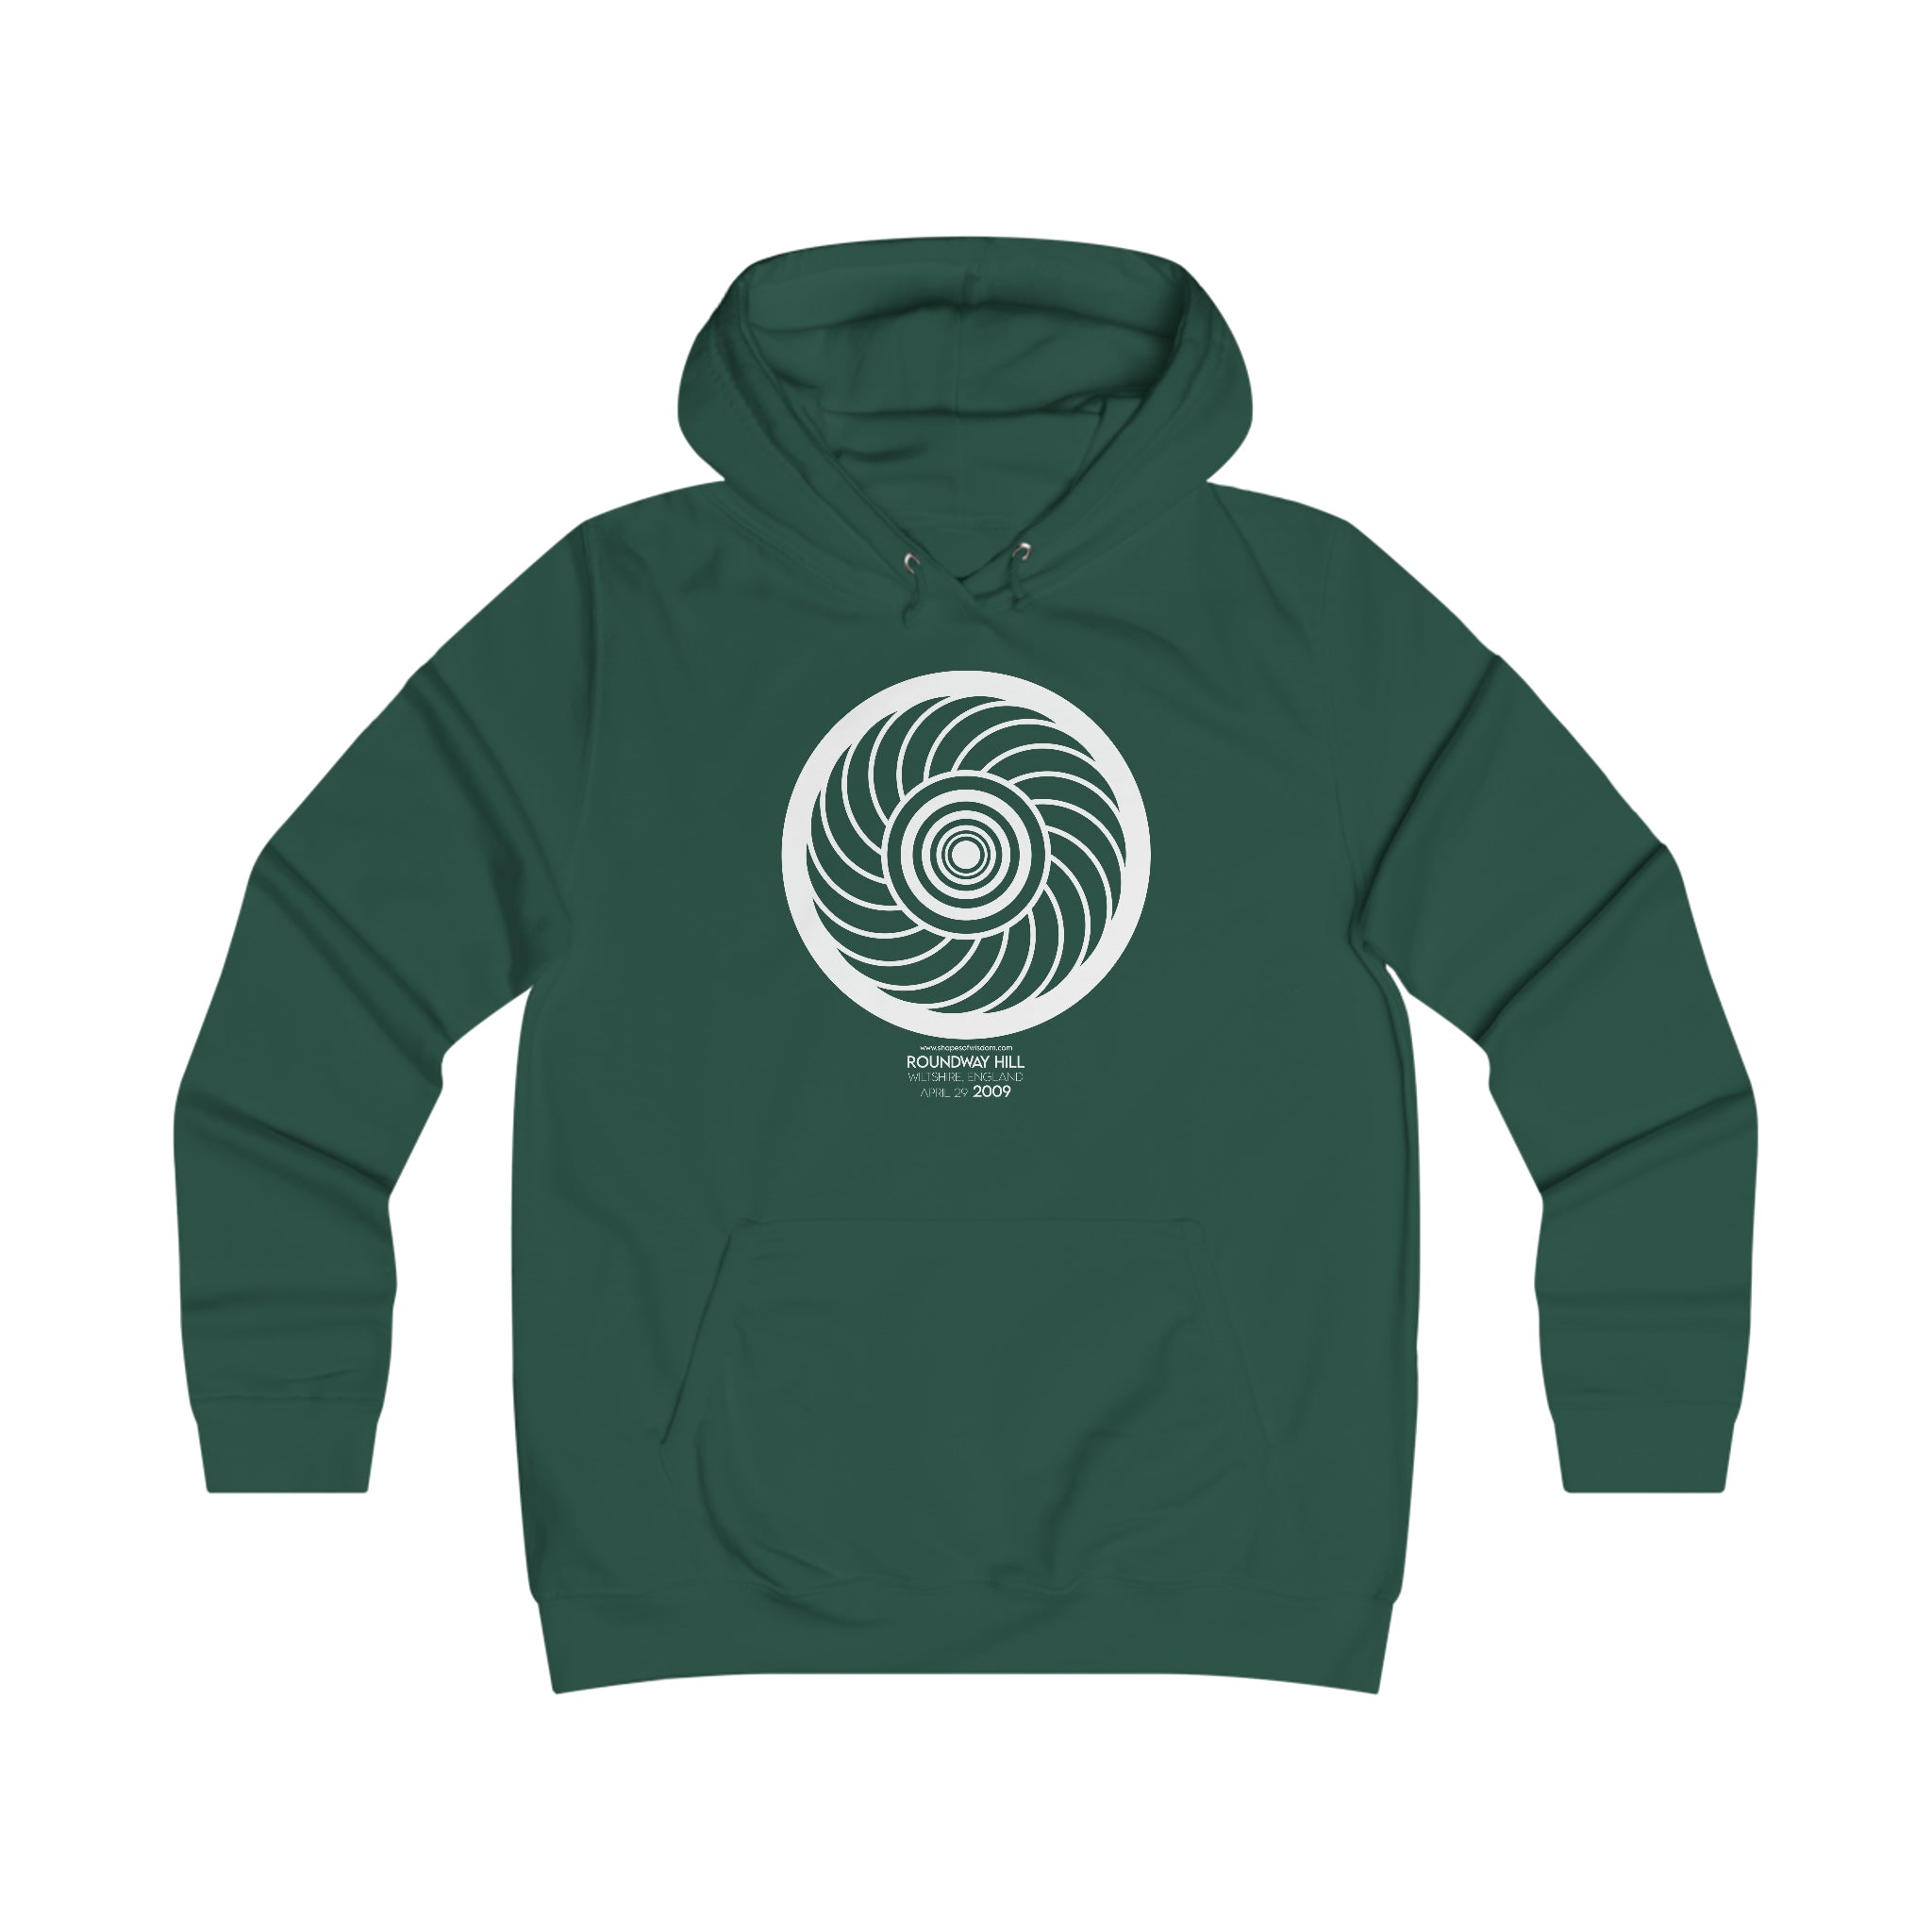 Crop Circle Girl College Hoodie - Roundway Hill